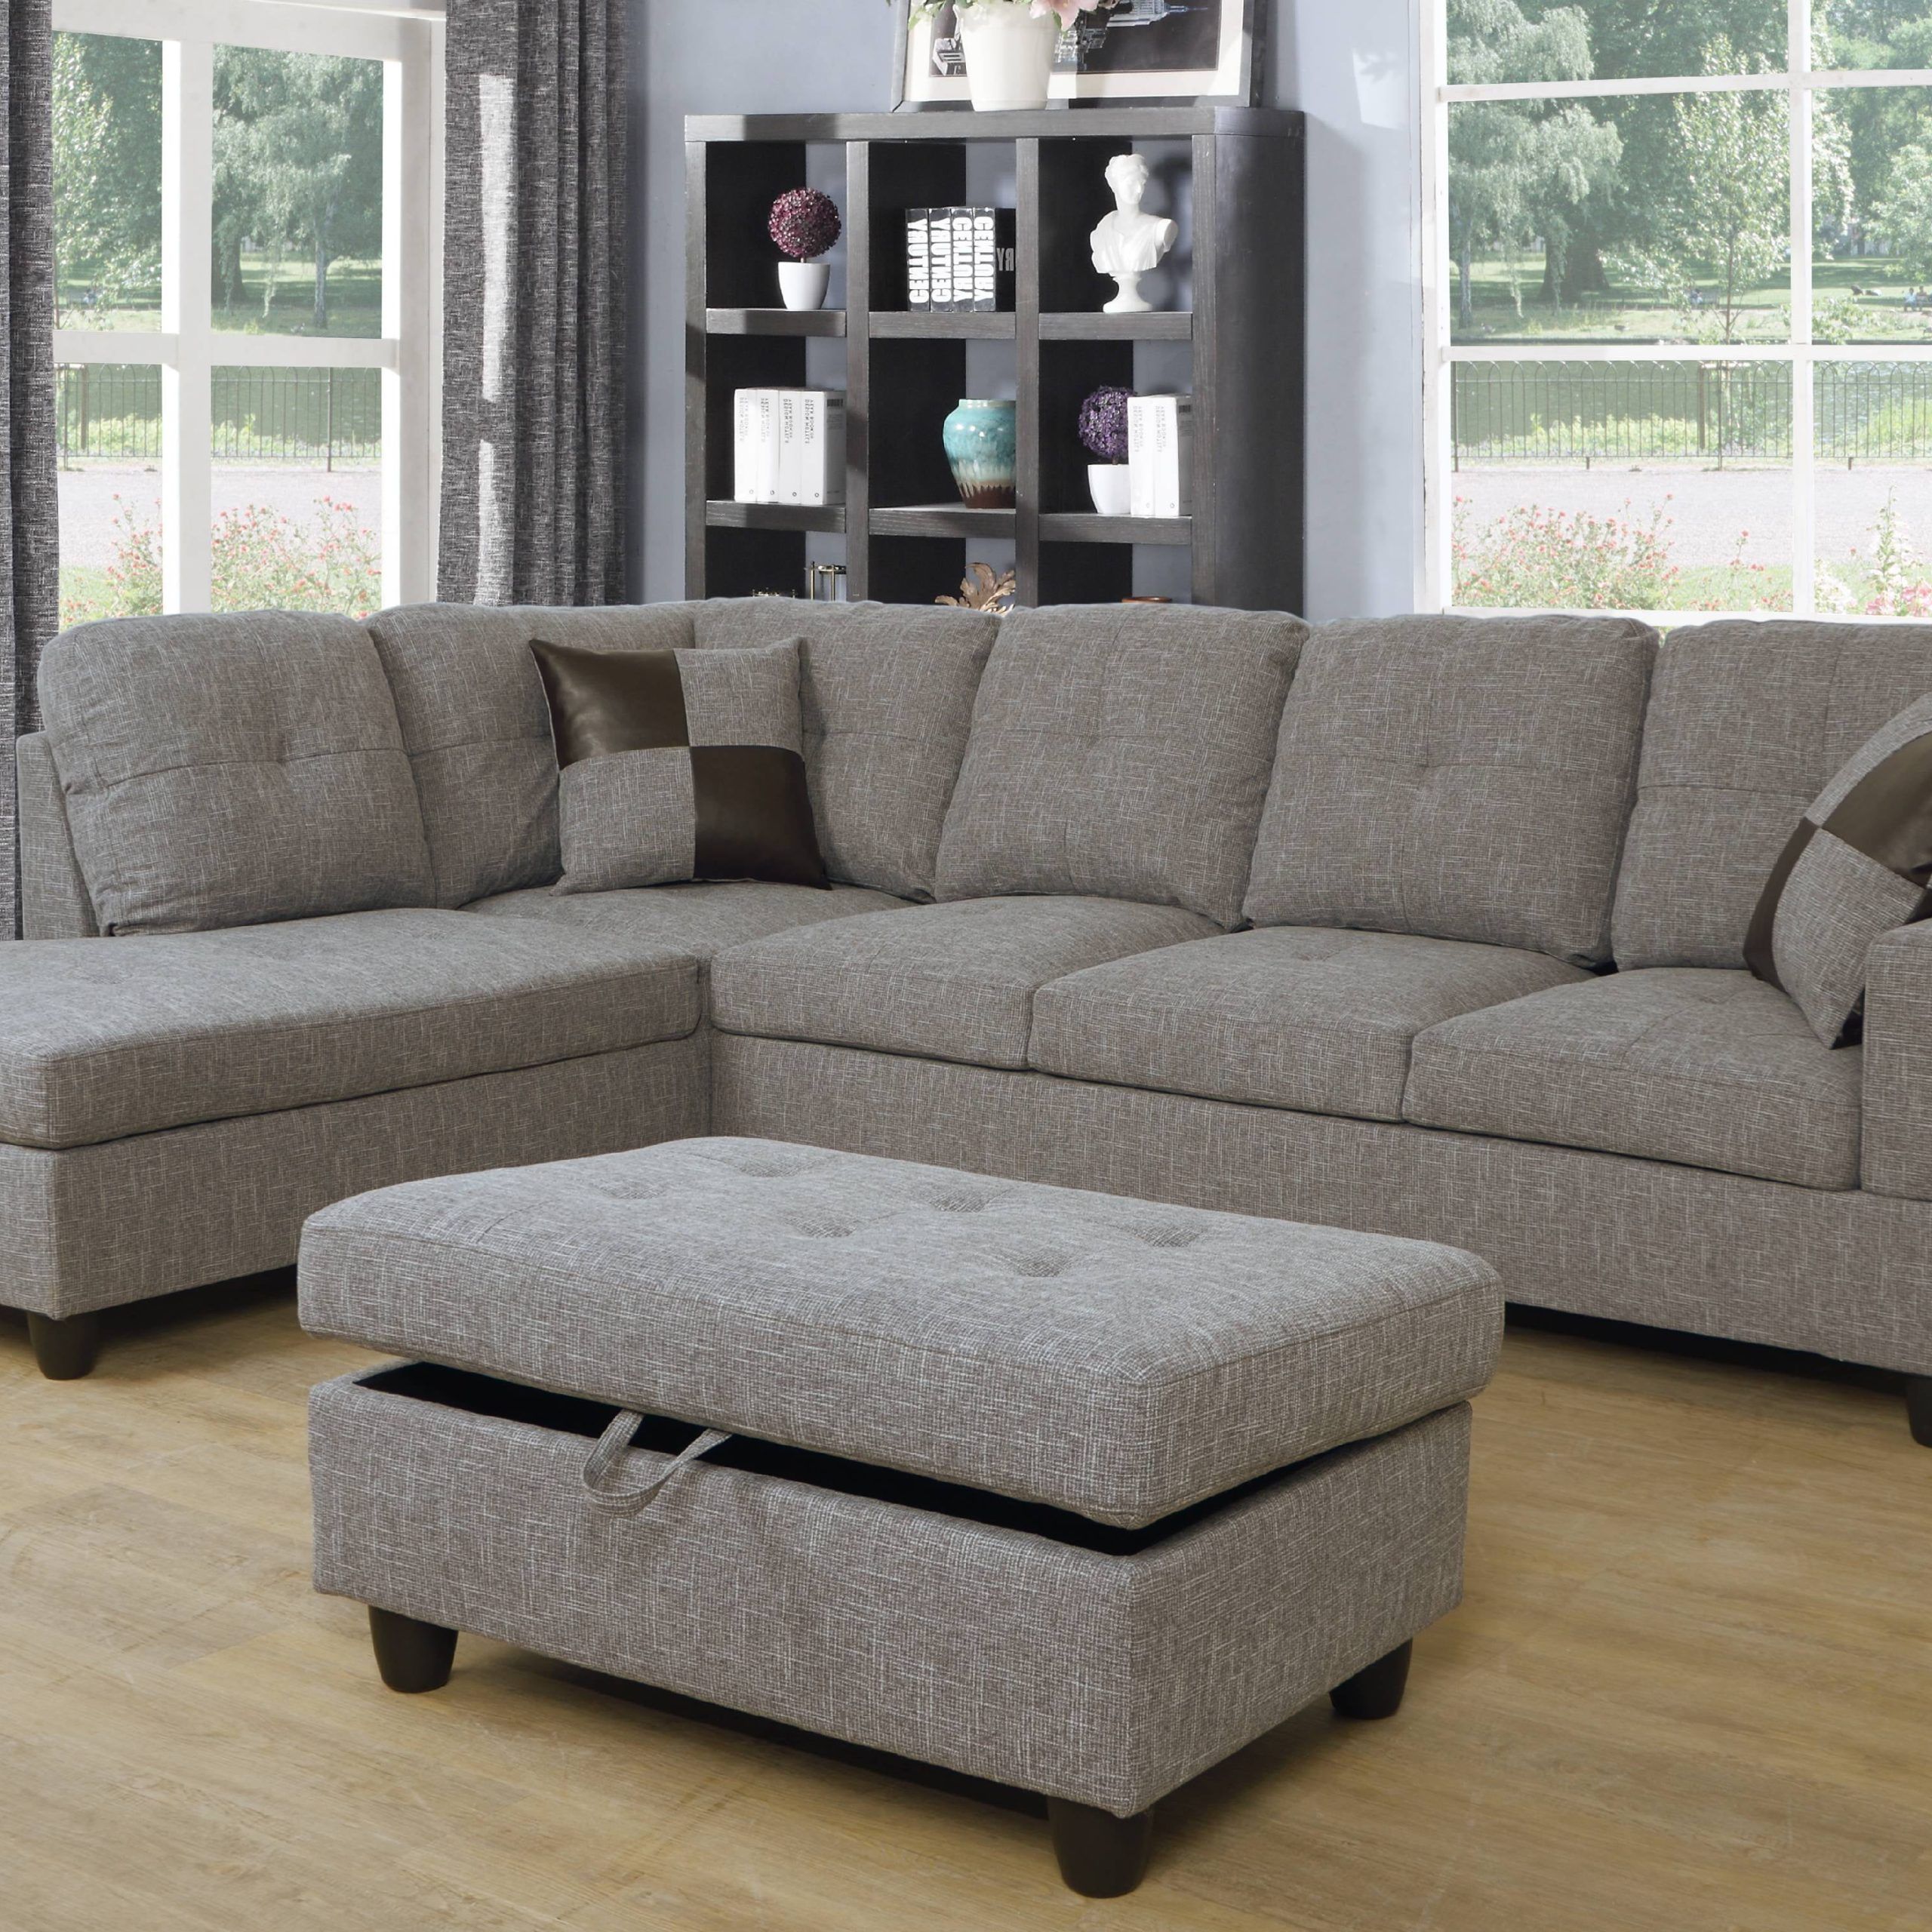 Ponliving Furniture L Shape Sectional Sofa Set With Storage Ottoman Regarding Sofas With Ottomans In Brown (View 19 of 20)